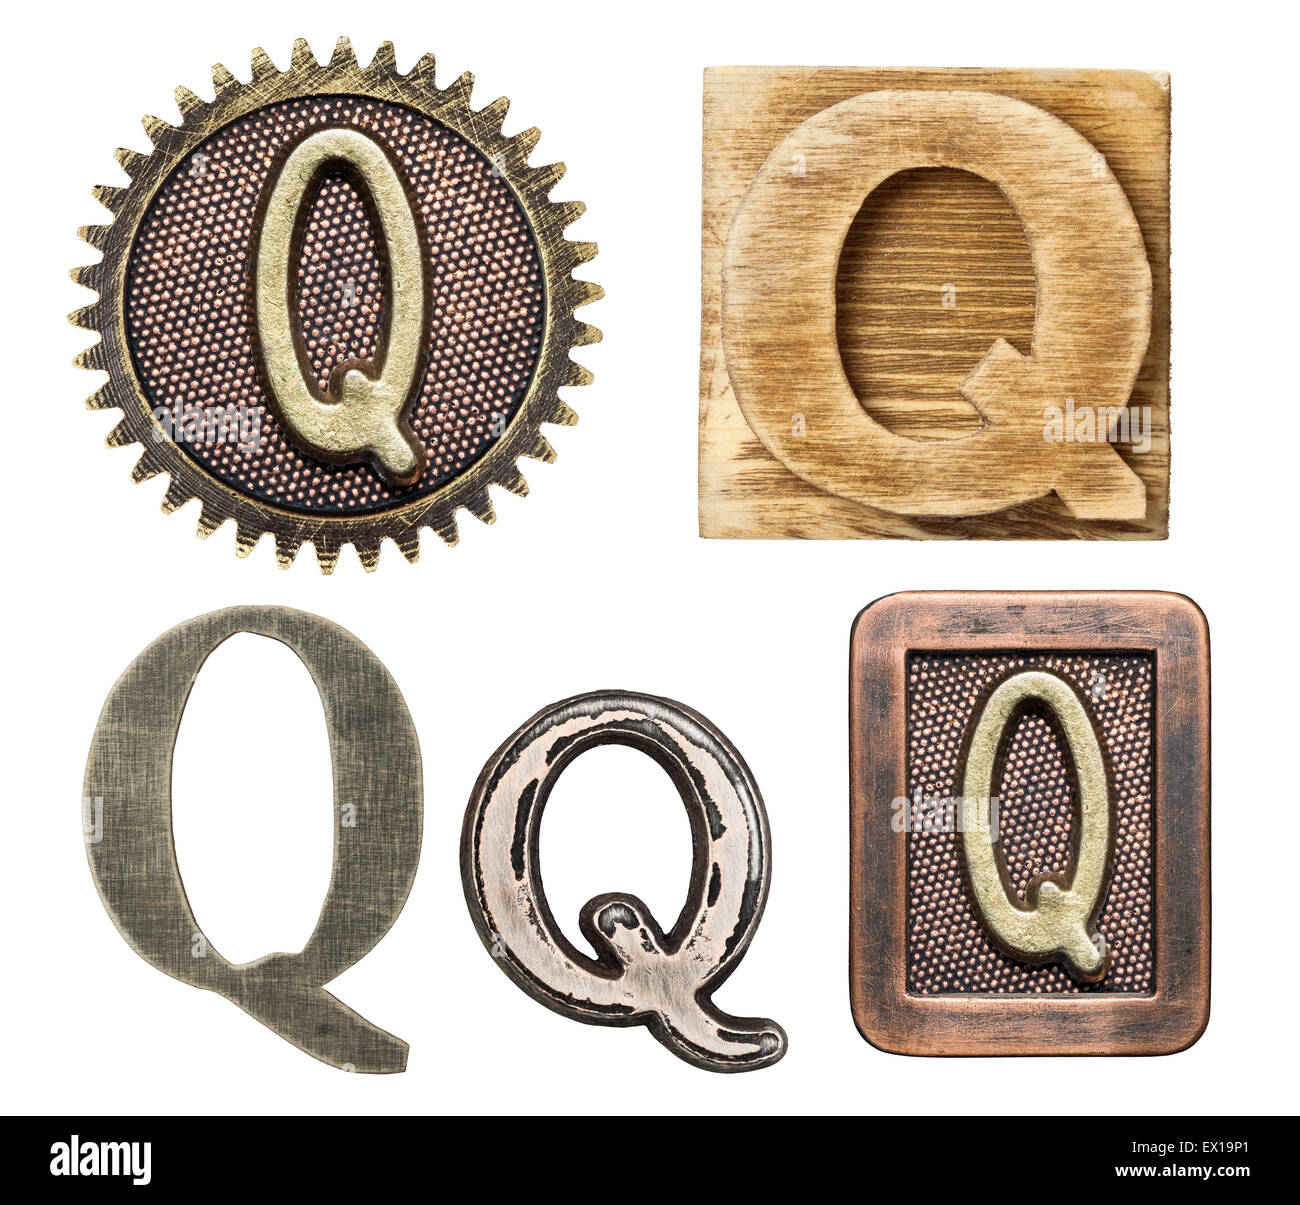 Alphabet made of wood and metal. Letter Q Stock Photo